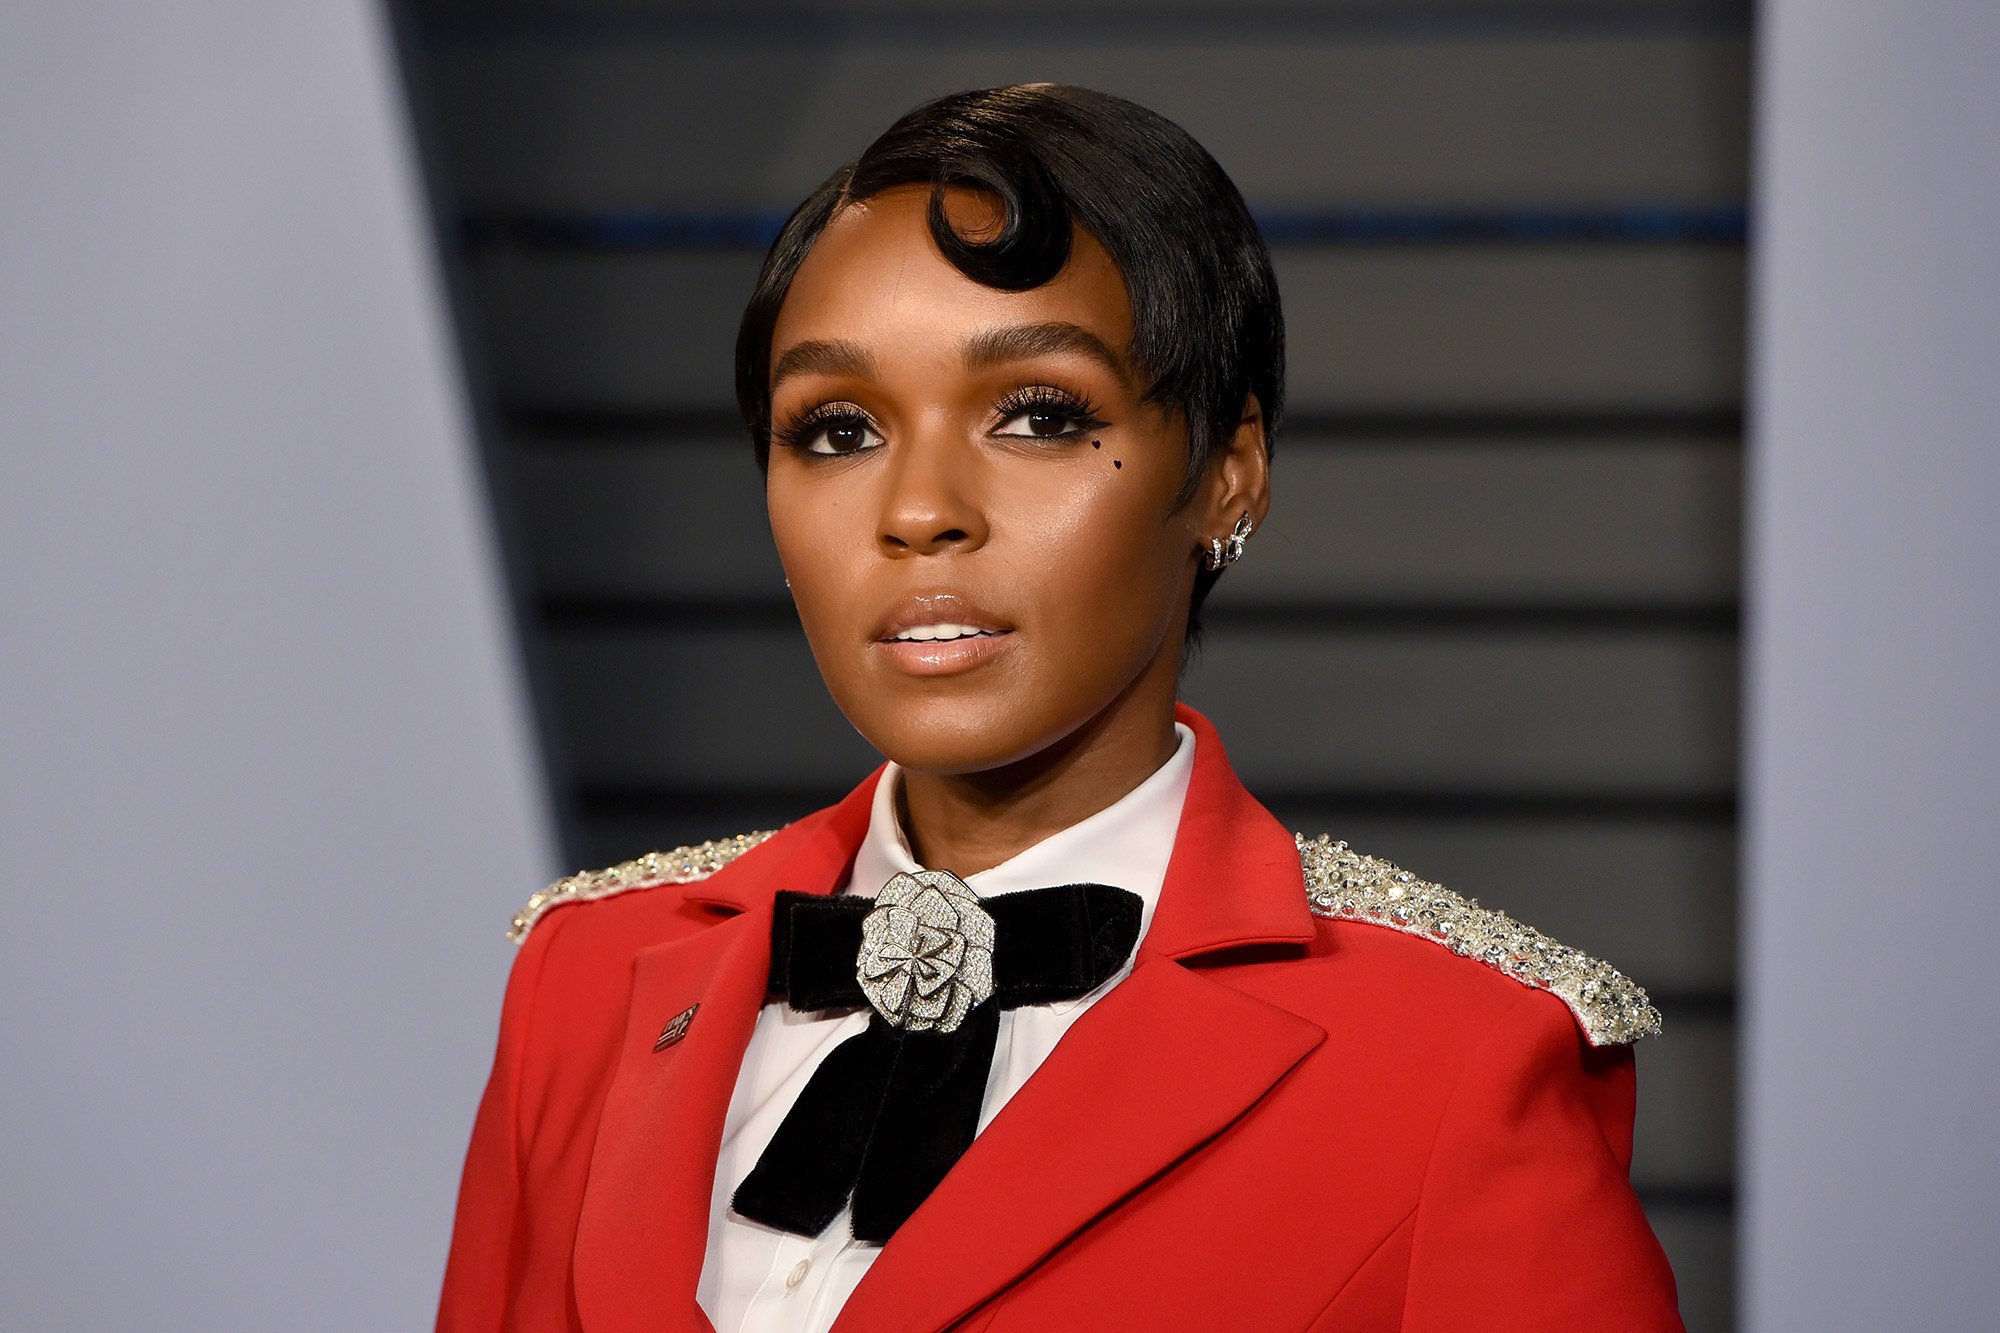 Ebony Magazine On Twitter Janelle Monáe Came Out As A Queer In April